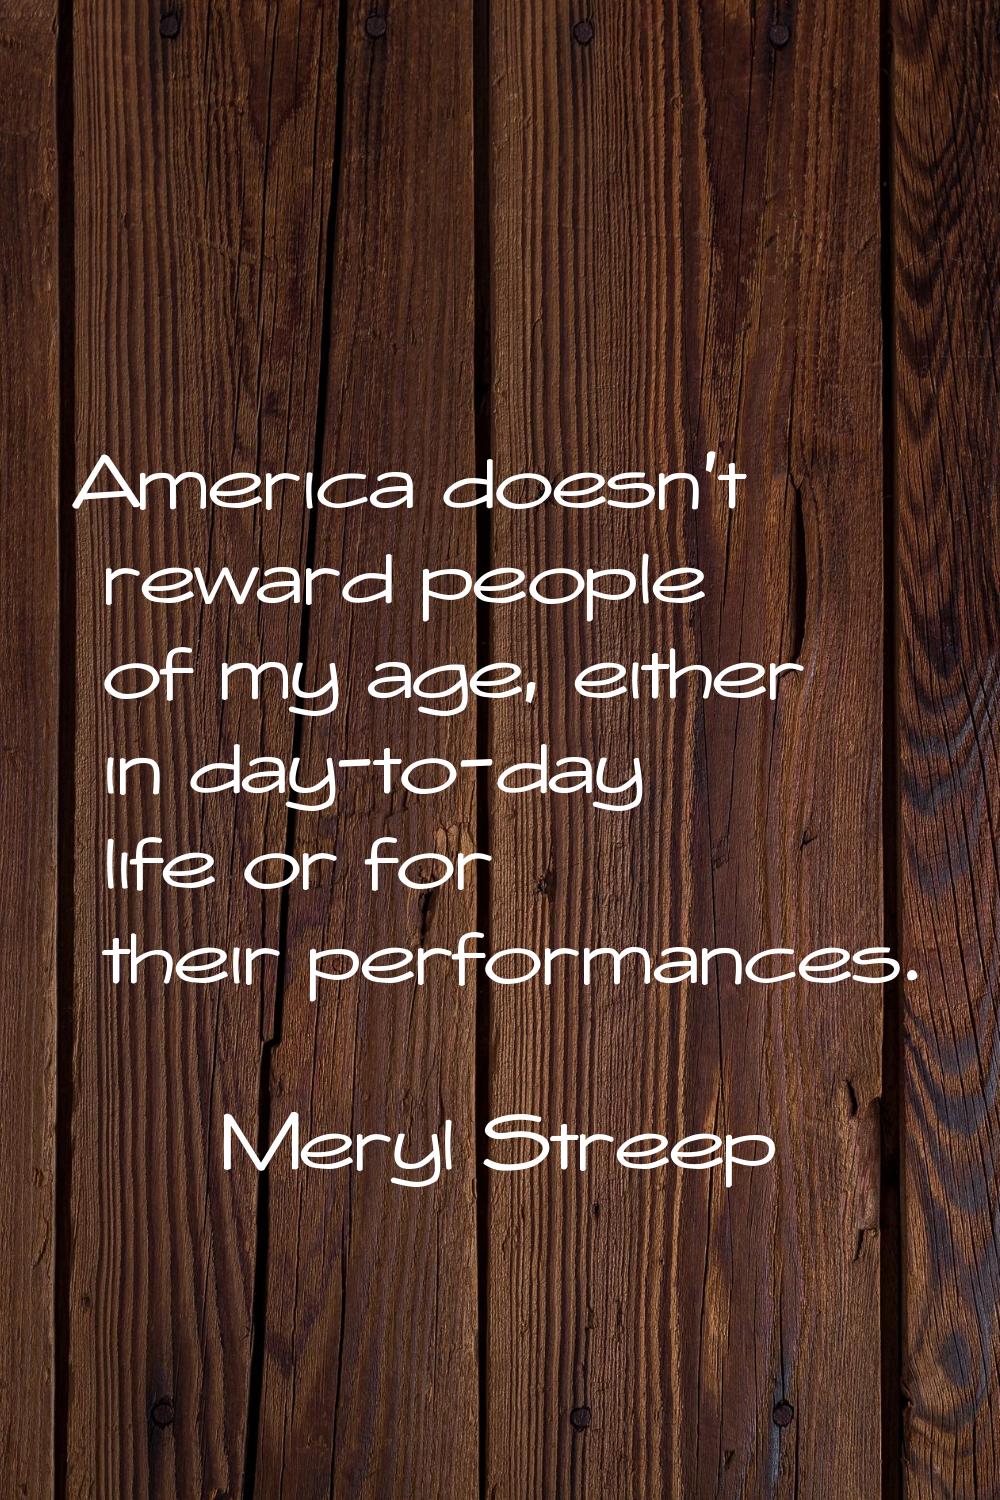 America doesn't reward people of my age, either in day-to-day life or for their performances.